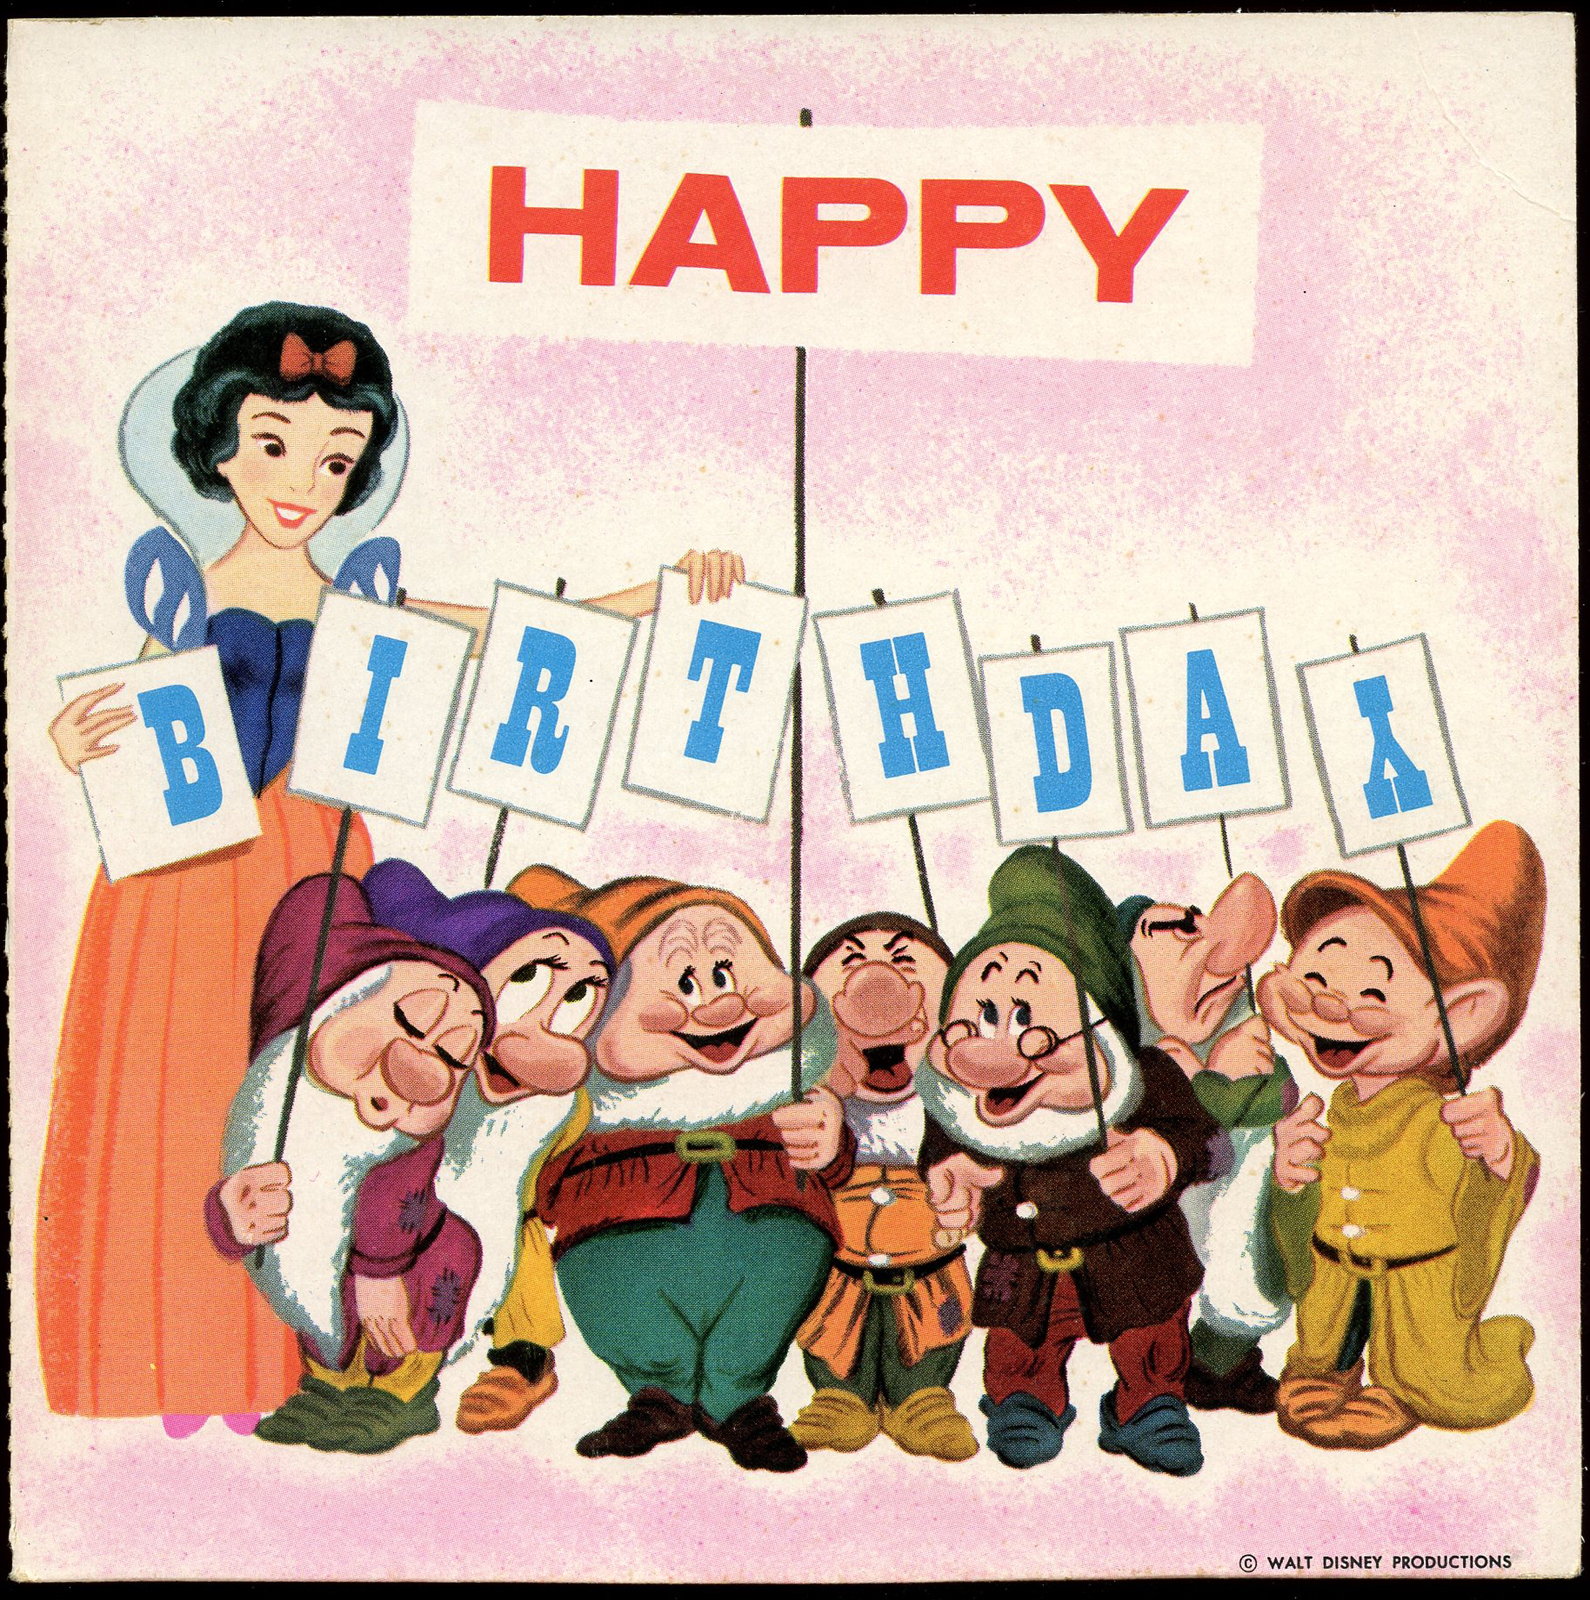 Filmic Light - Snow White Archive: 1964 Snow White Birthday Card with Record